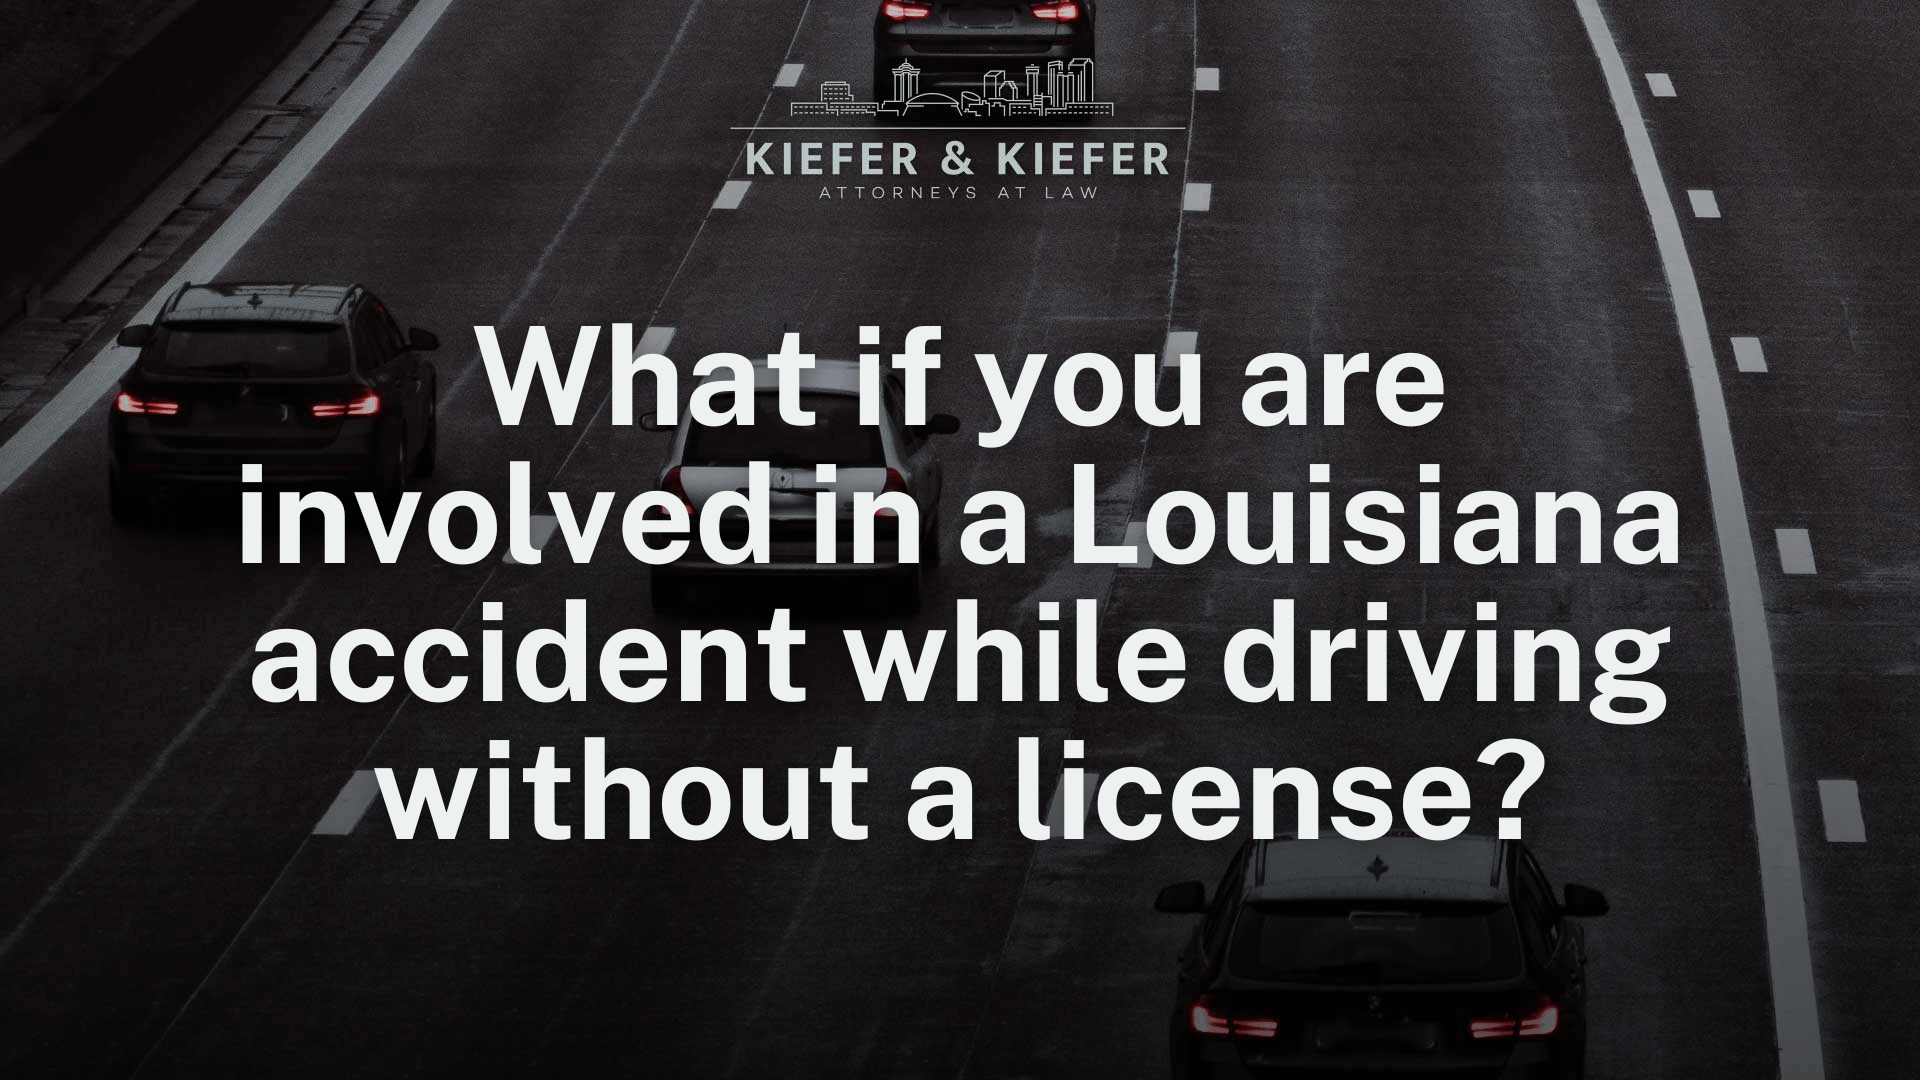 What if you are involved in a Louisiana accident while driving without a license - Kiefer & Kiefer New Orleans Personal Injury Attorneys